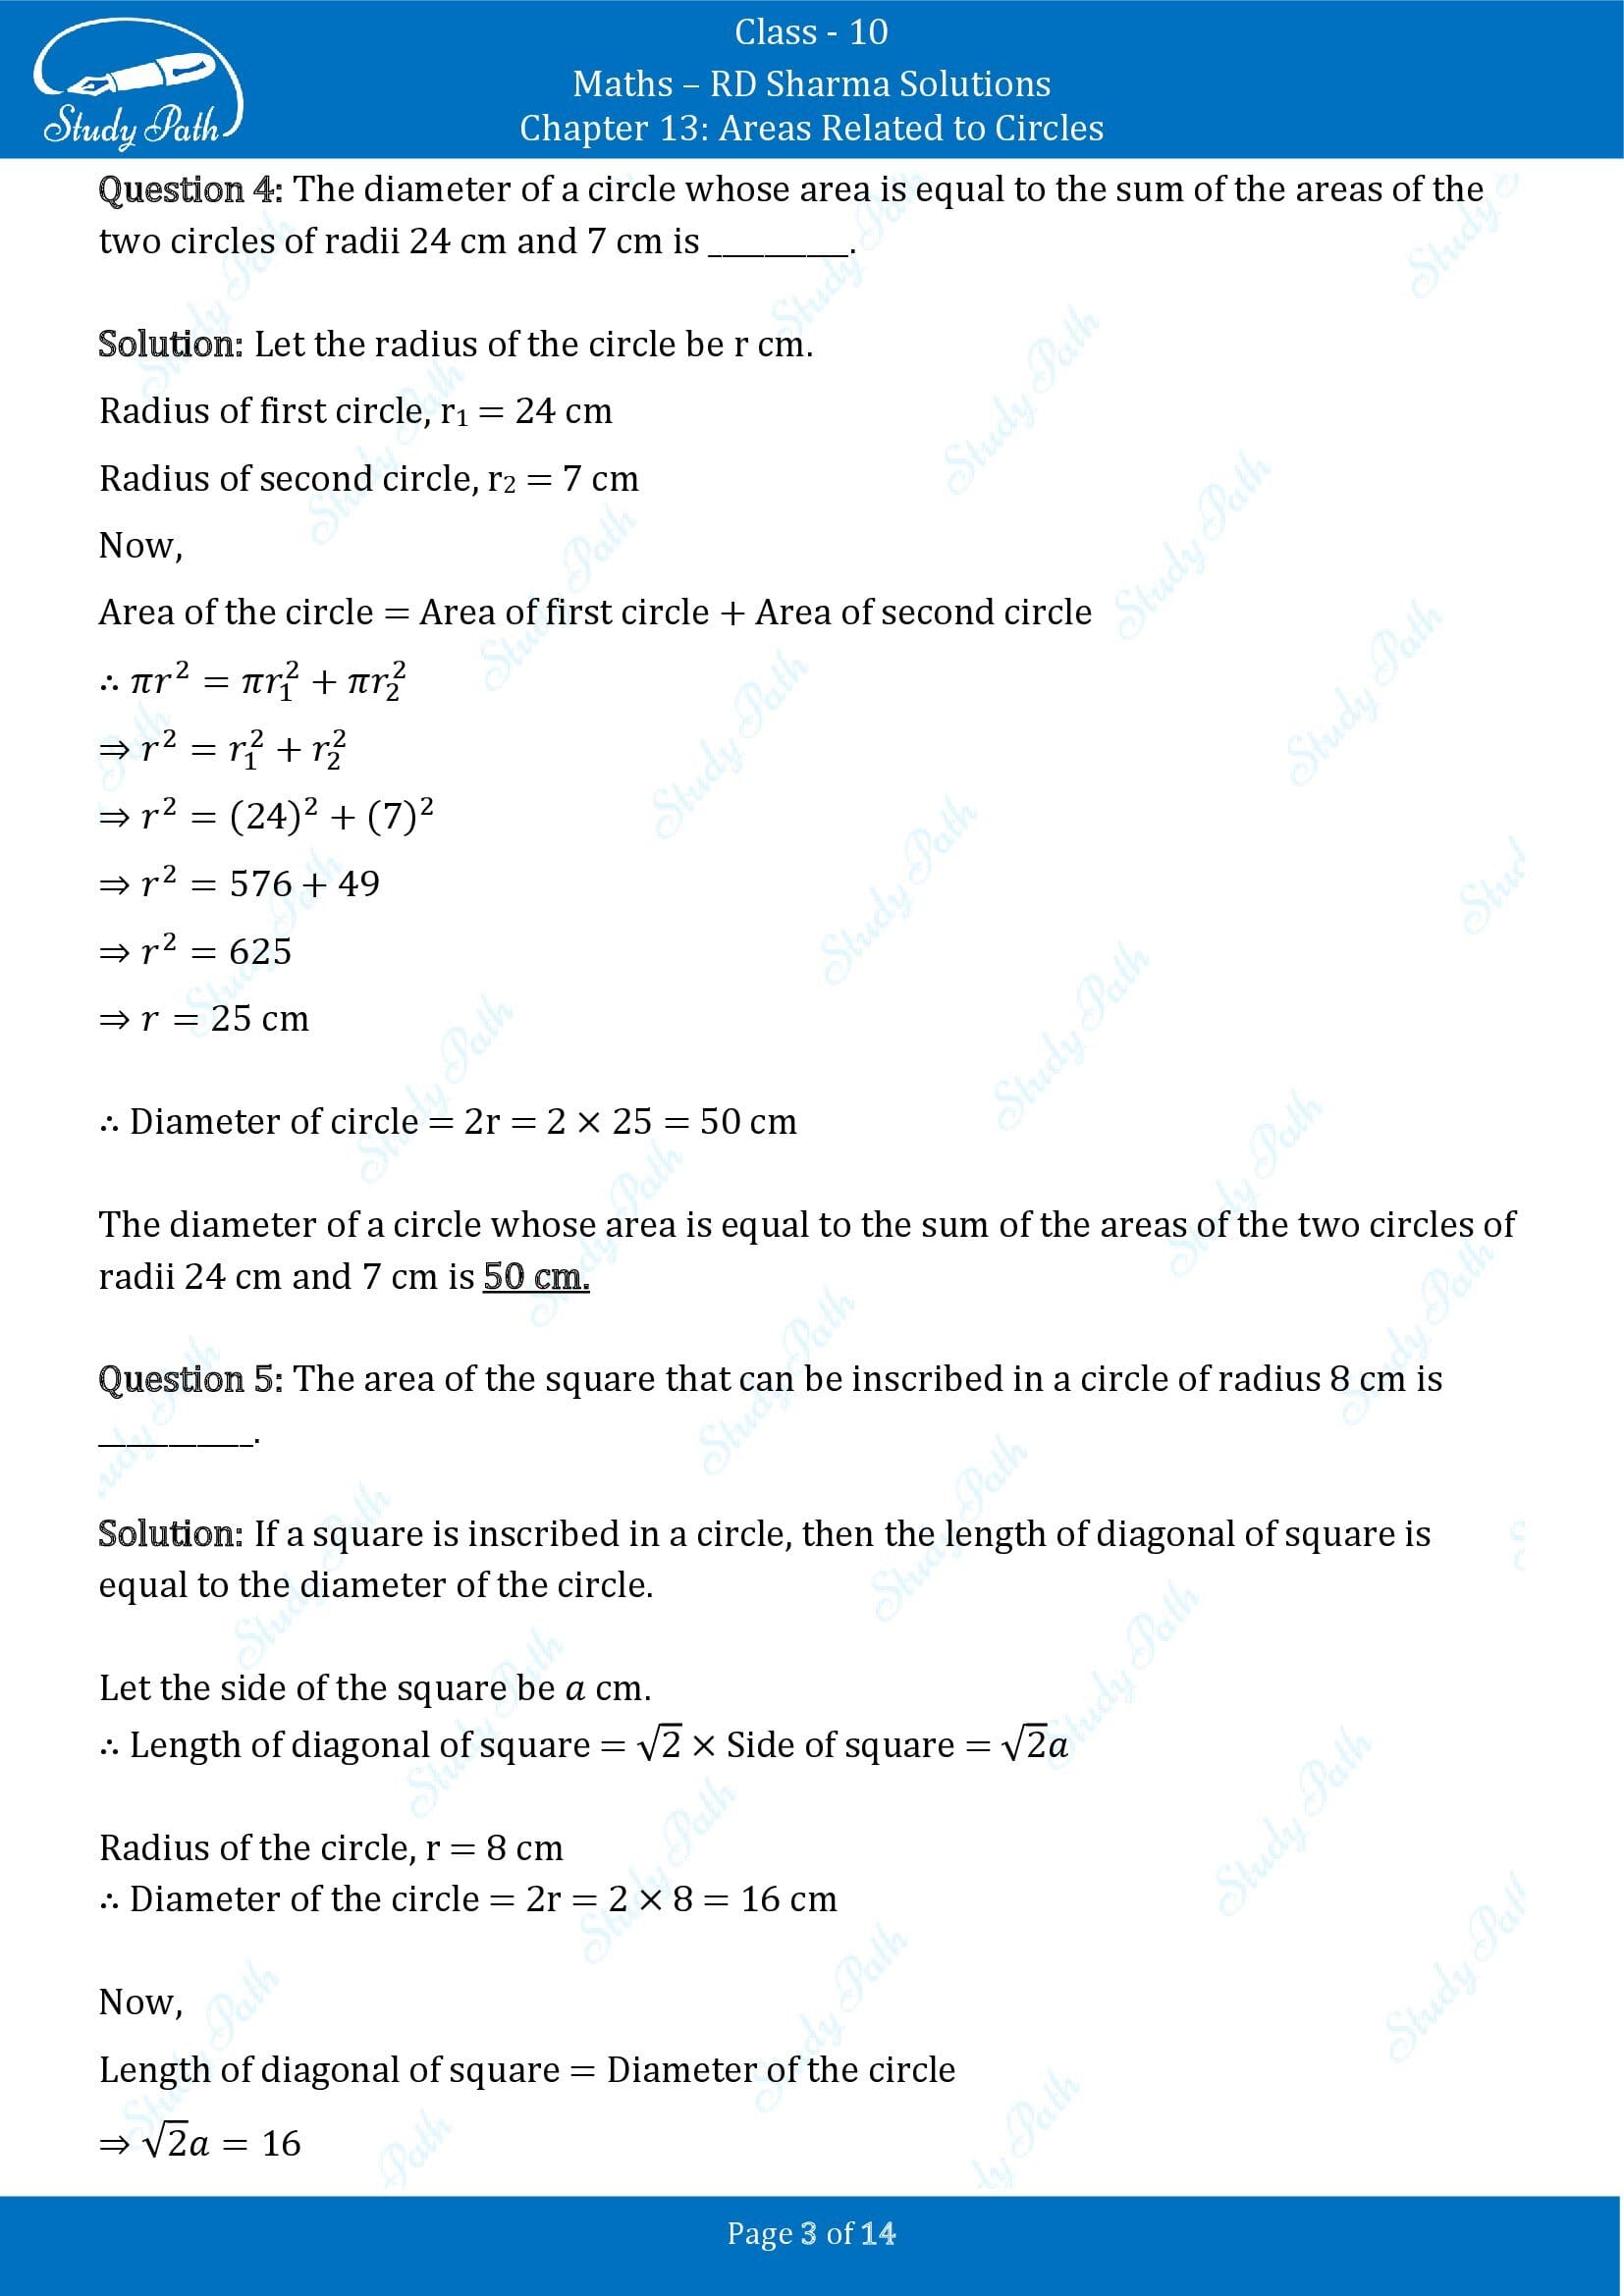 RD Sharma Solutions Class 10 Chapter 13 Areas Related to Circles Fill in the Blank Type Questions FBQs 00003